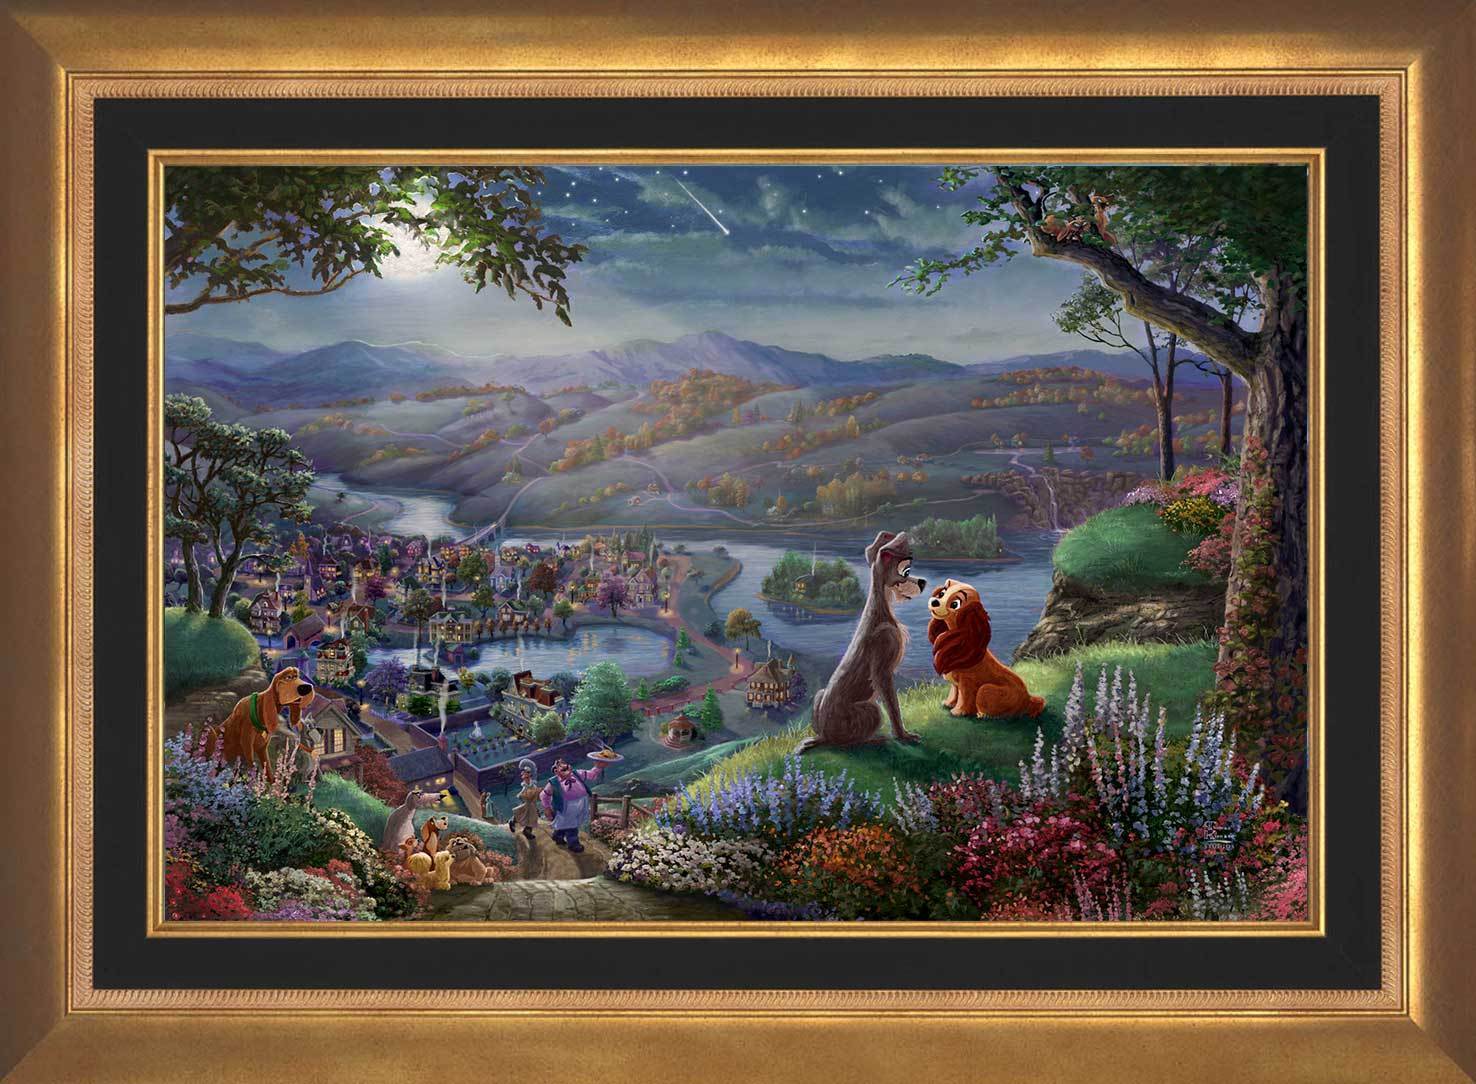  Lady and the Tramp sit gazing into each other’s eyes and falling-in-love, they are seemingly unaware of the world around them - in Aurora Gold Frame